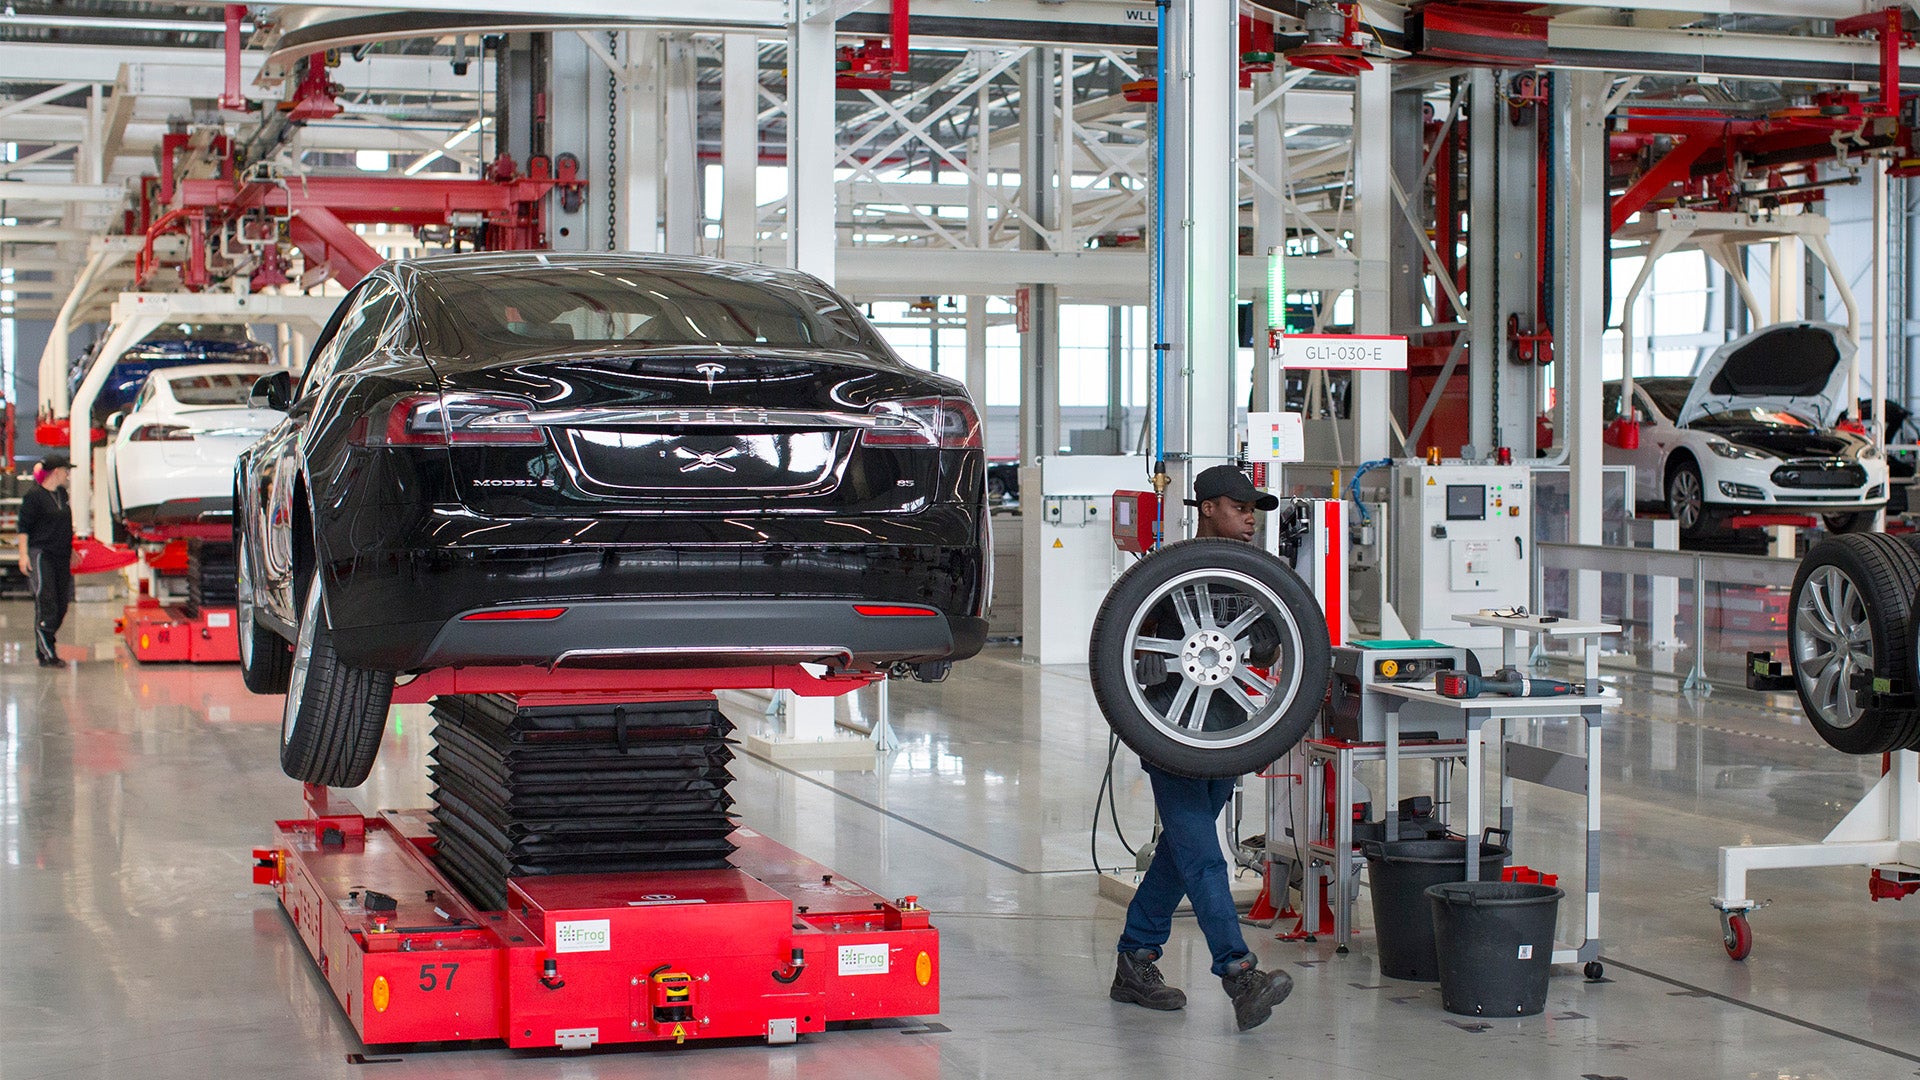 Tesla Production Pace Is Hurting Quality, Report Says